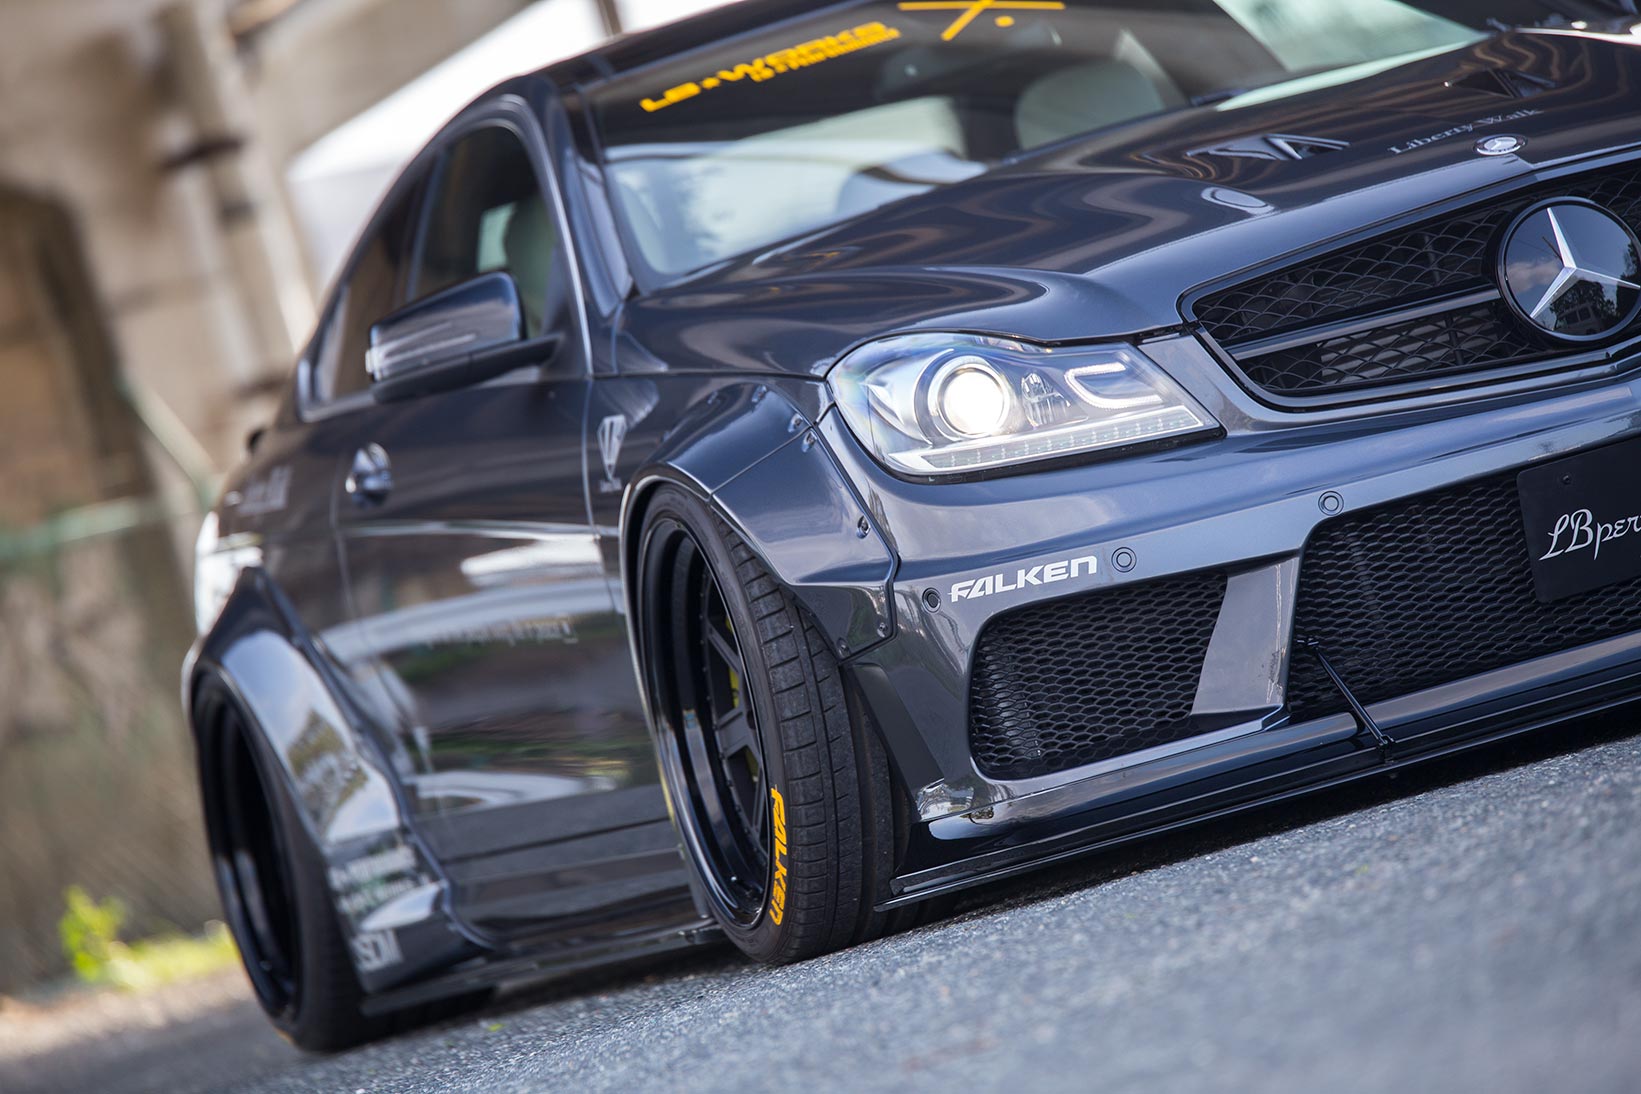 Lb-Works Mercedes-Benz C63 Coupe & Sedan W204 - Liberty Walk | リバティーウォーク  Complete Car And Customize!